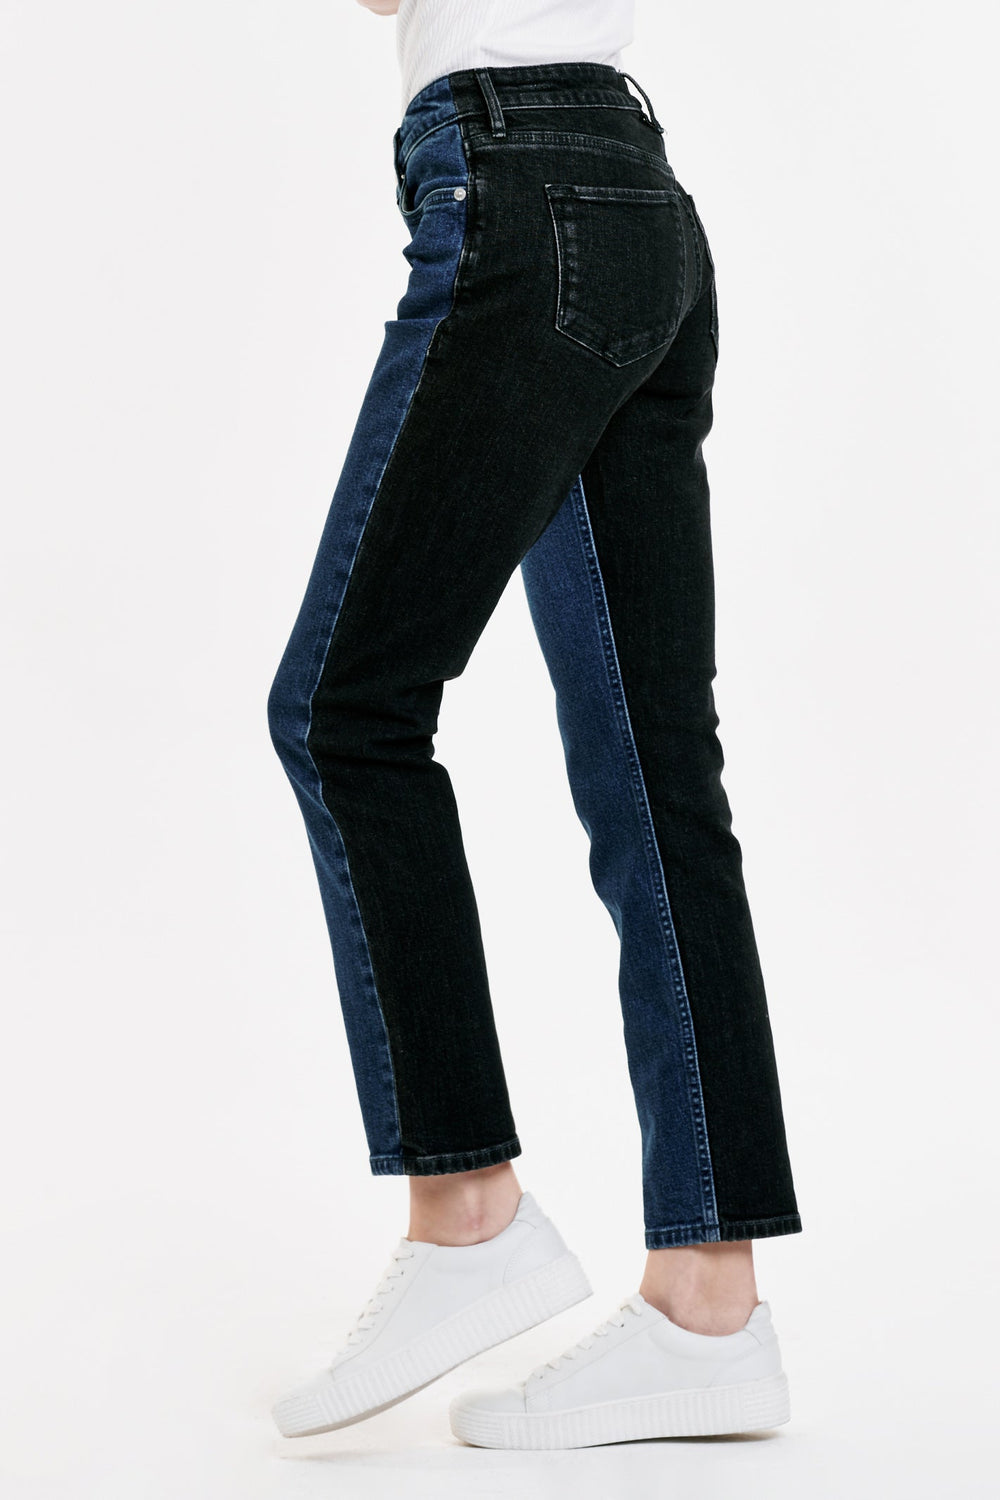 image of a female model wearing a BLAIRE HIGH RISE ANKLE SLIM STRAIGHT JEANS MOOD JEANS